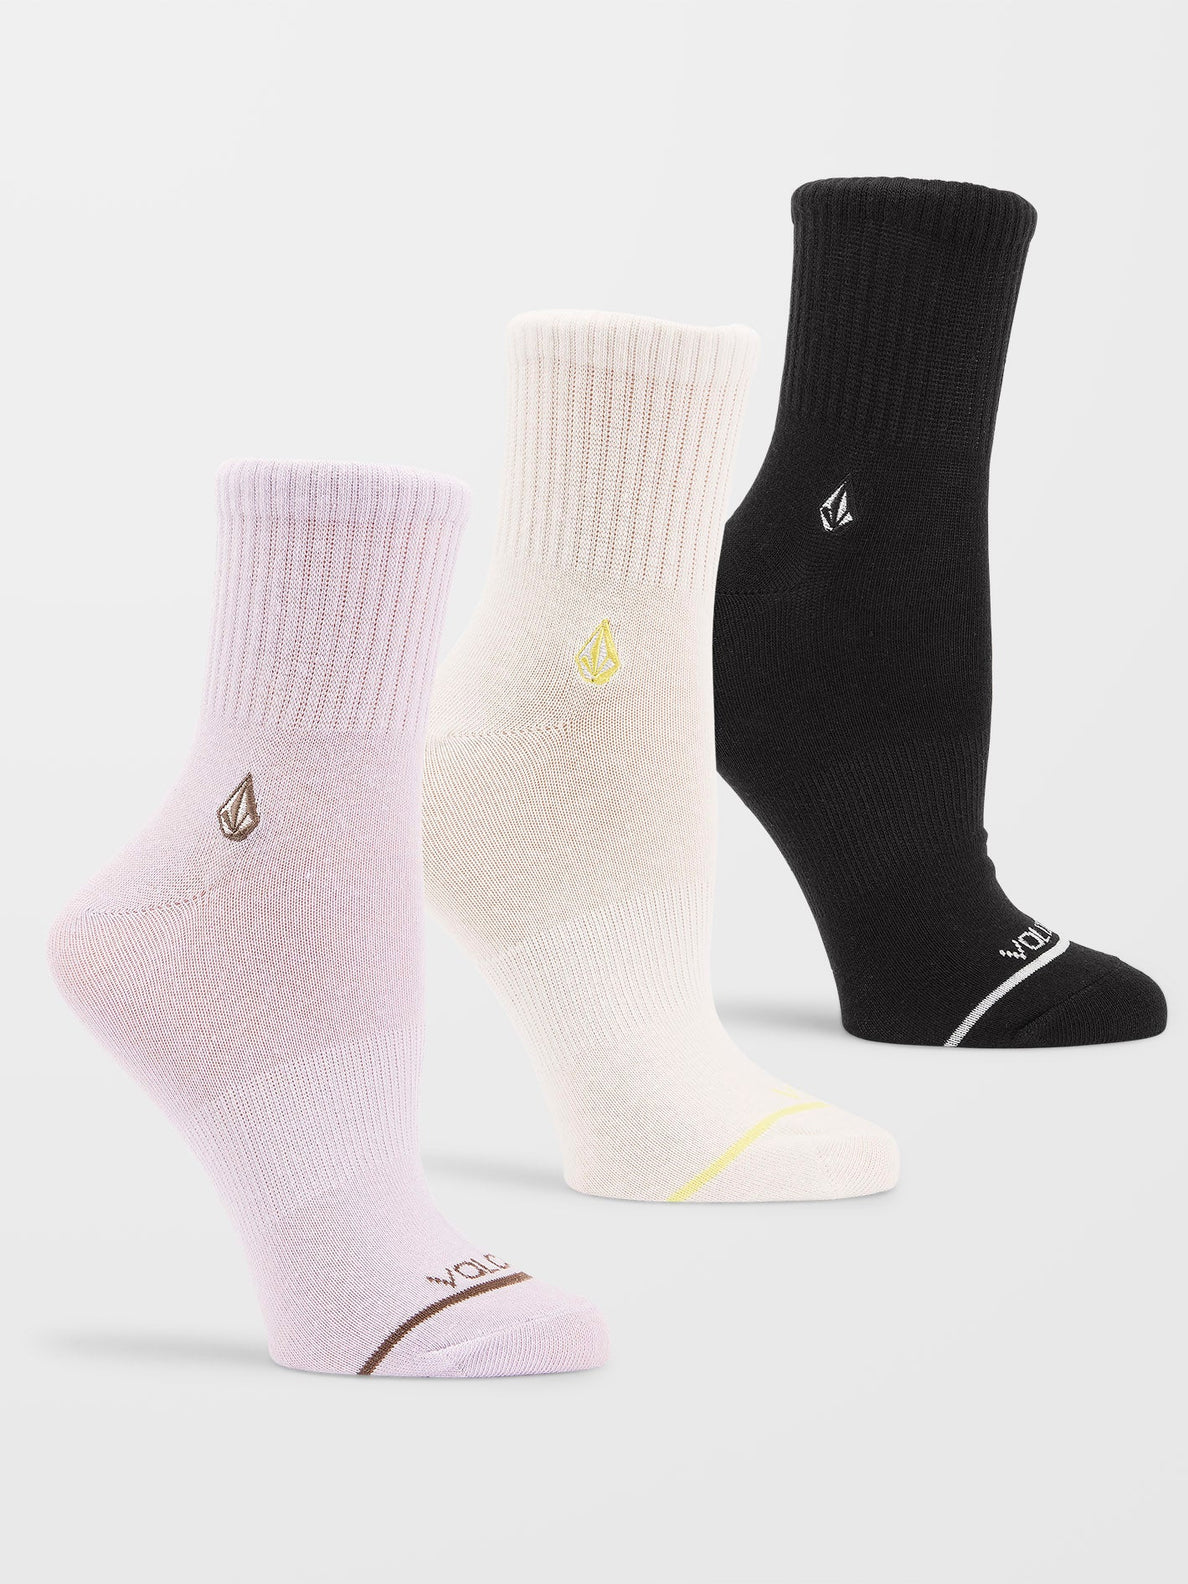 The New Crew Socks (3 pack) - ASSORTED COLORS